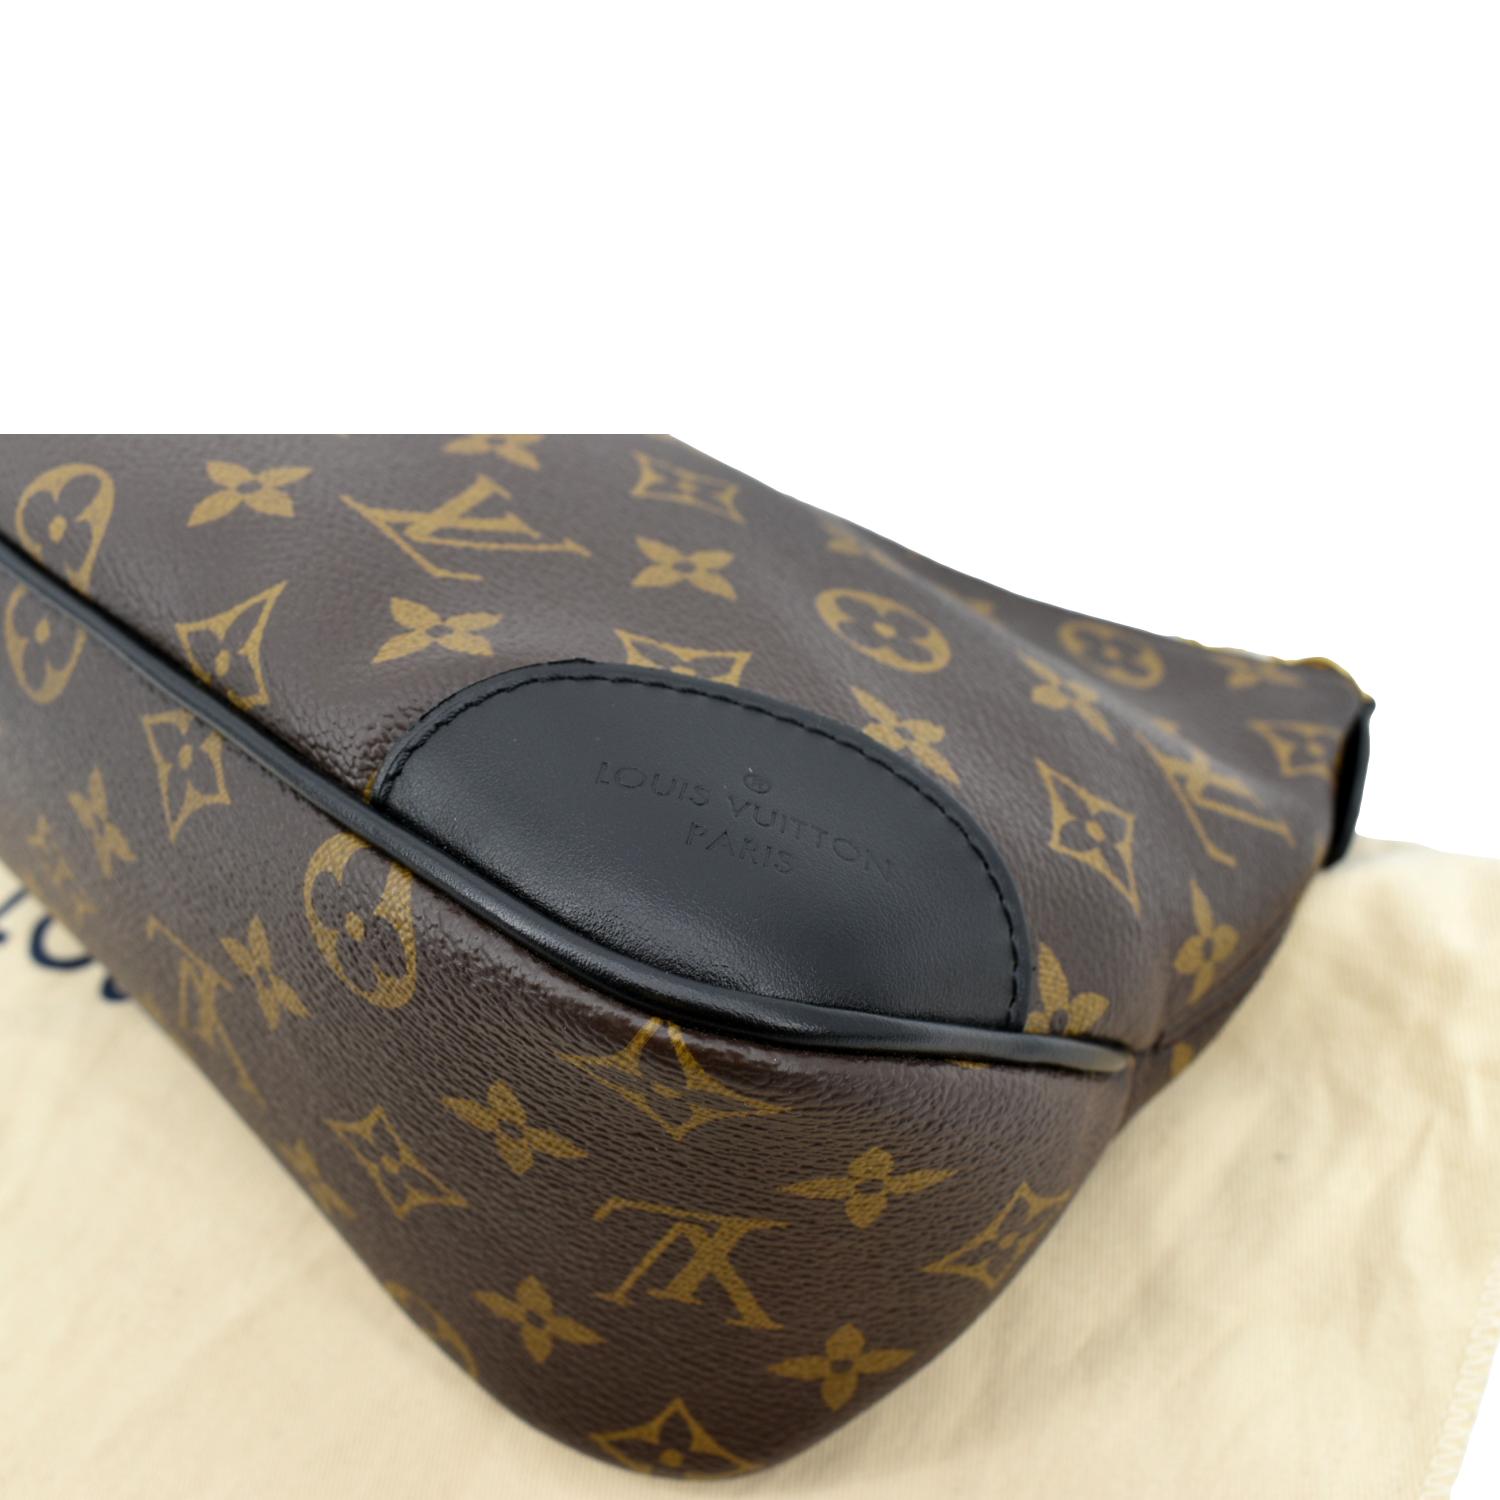 Boulogne leather handbag Louis Vuitton Brown in Leather - 27938378